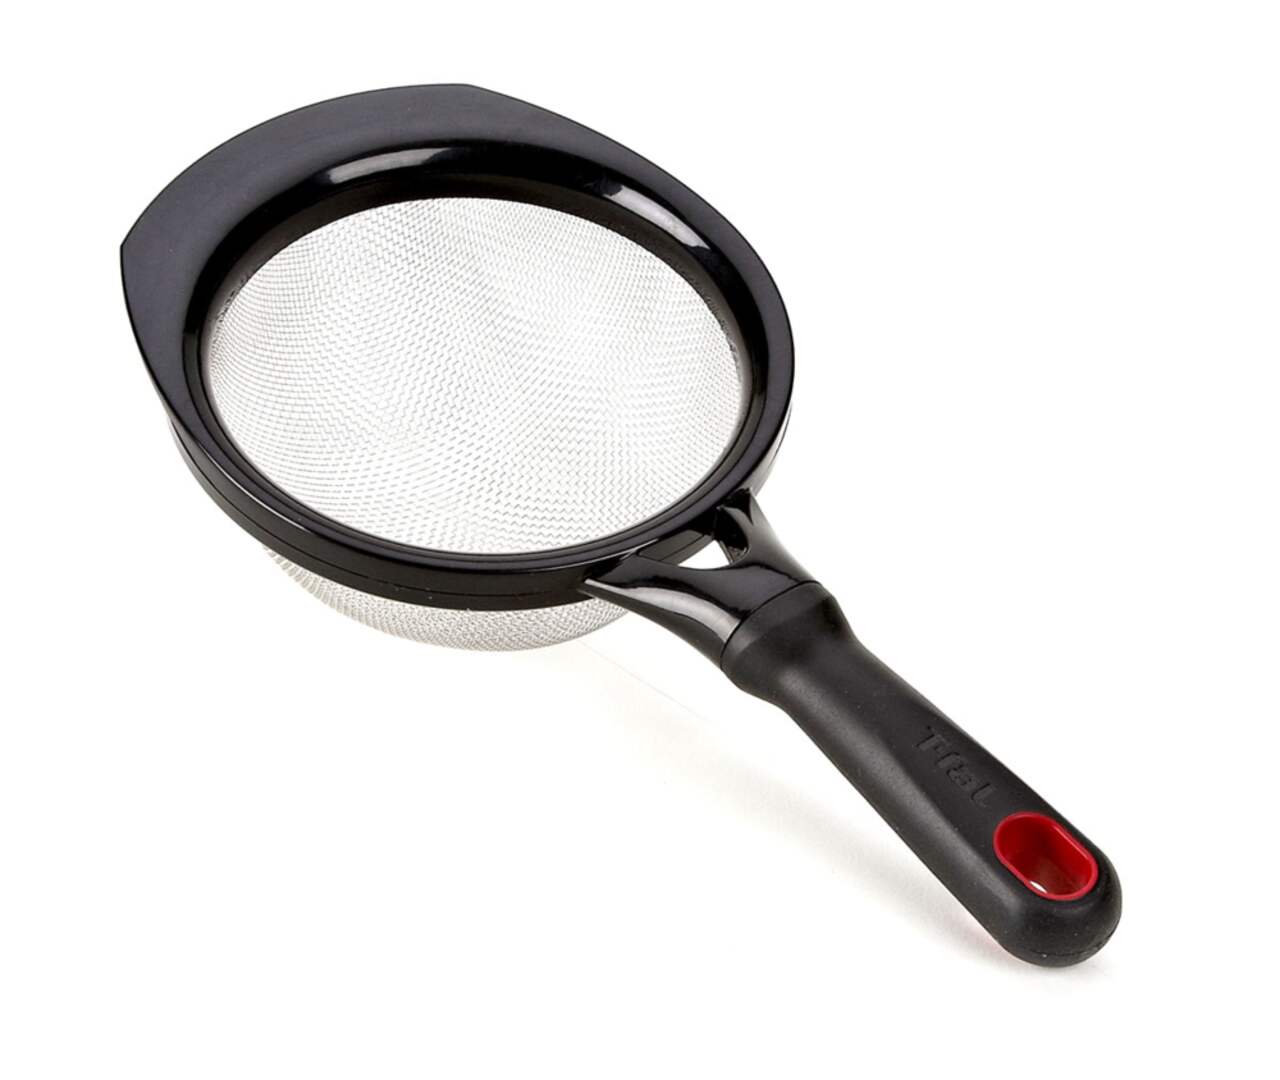 https://media-www.canadiantire.ca/product/living/kitchen/kitchen-tools-thermometers/1421353/t-fal-6-strainer-95a155f7-425e-41bb-a6fe-86c1bdce319c.png?imdensity=1&imwidth=640&impolicy=mZoom